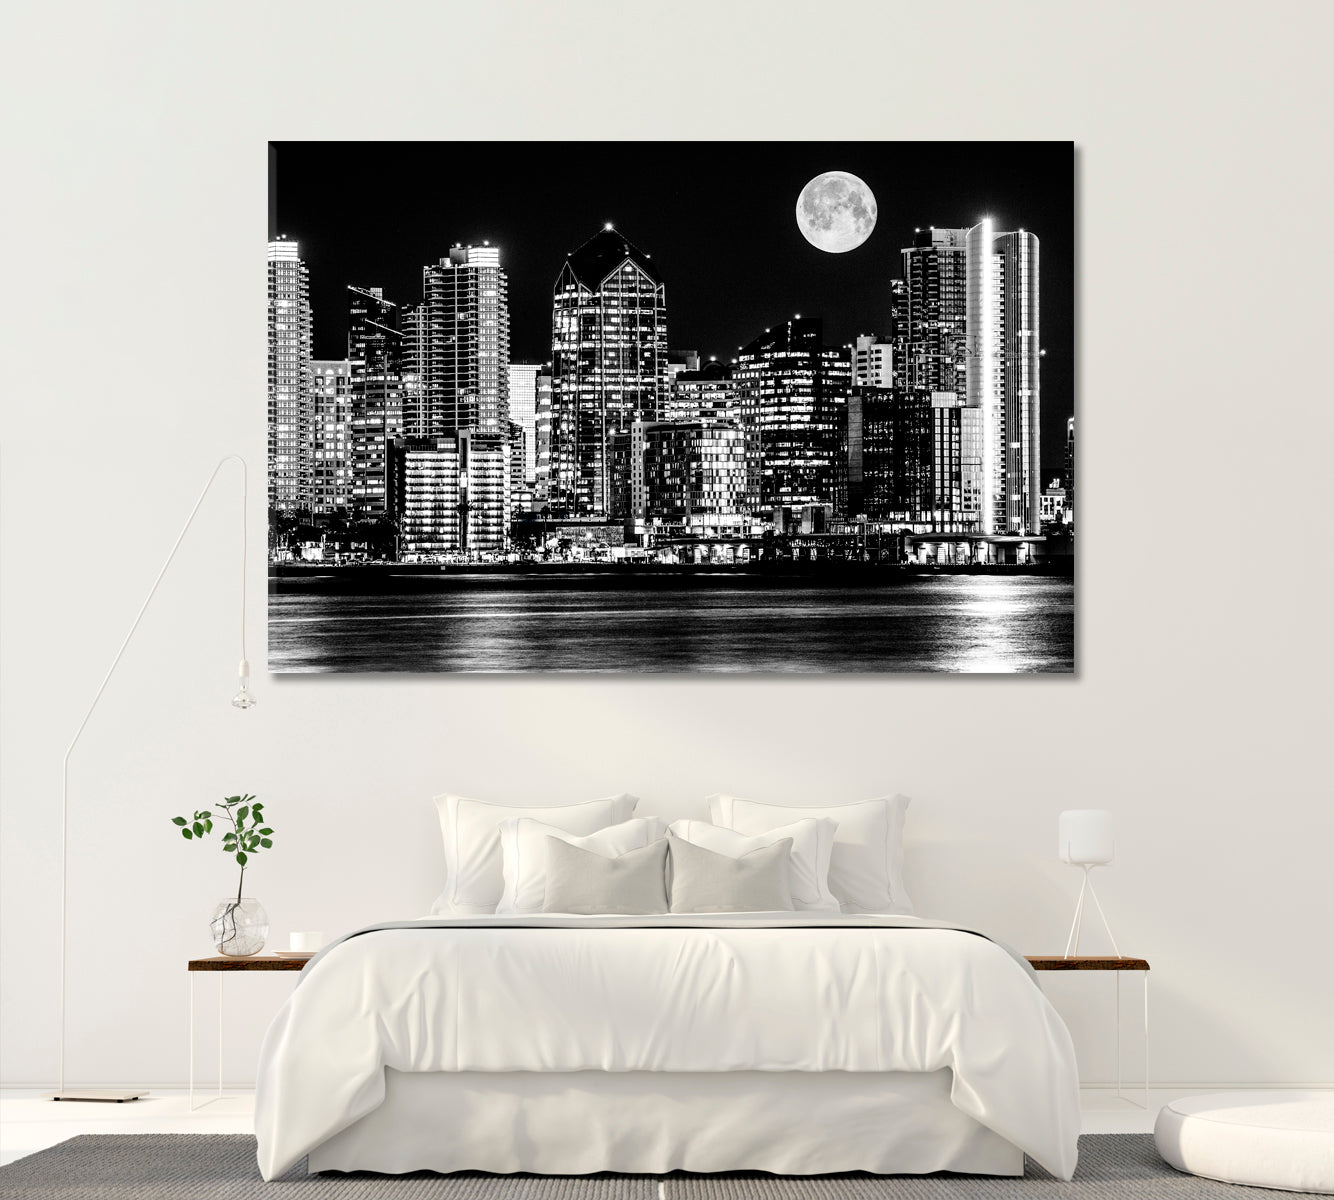 San Diego Skyline in Black and White Canvas Print ArtLexy 1 Panel 24"x16" inches 